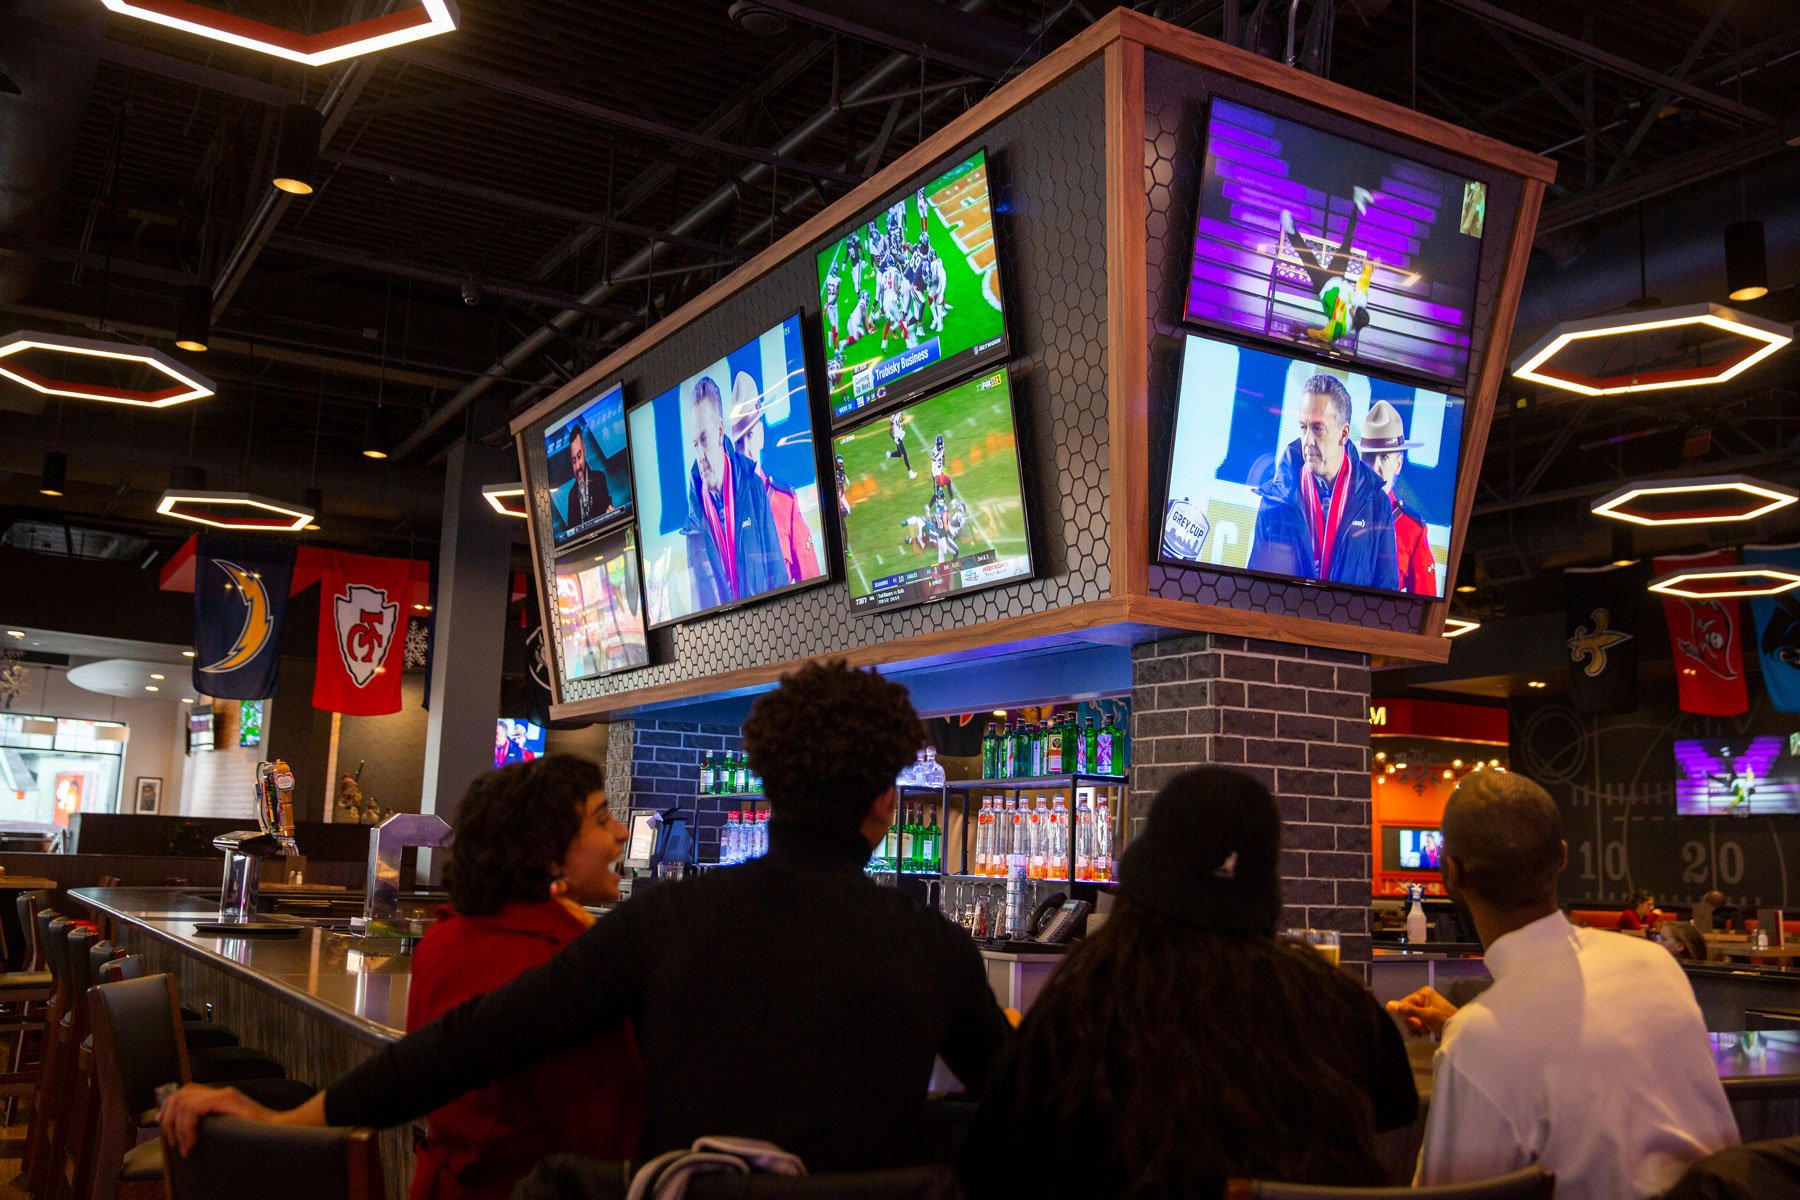 group of friends watching sports match with large screens above bar